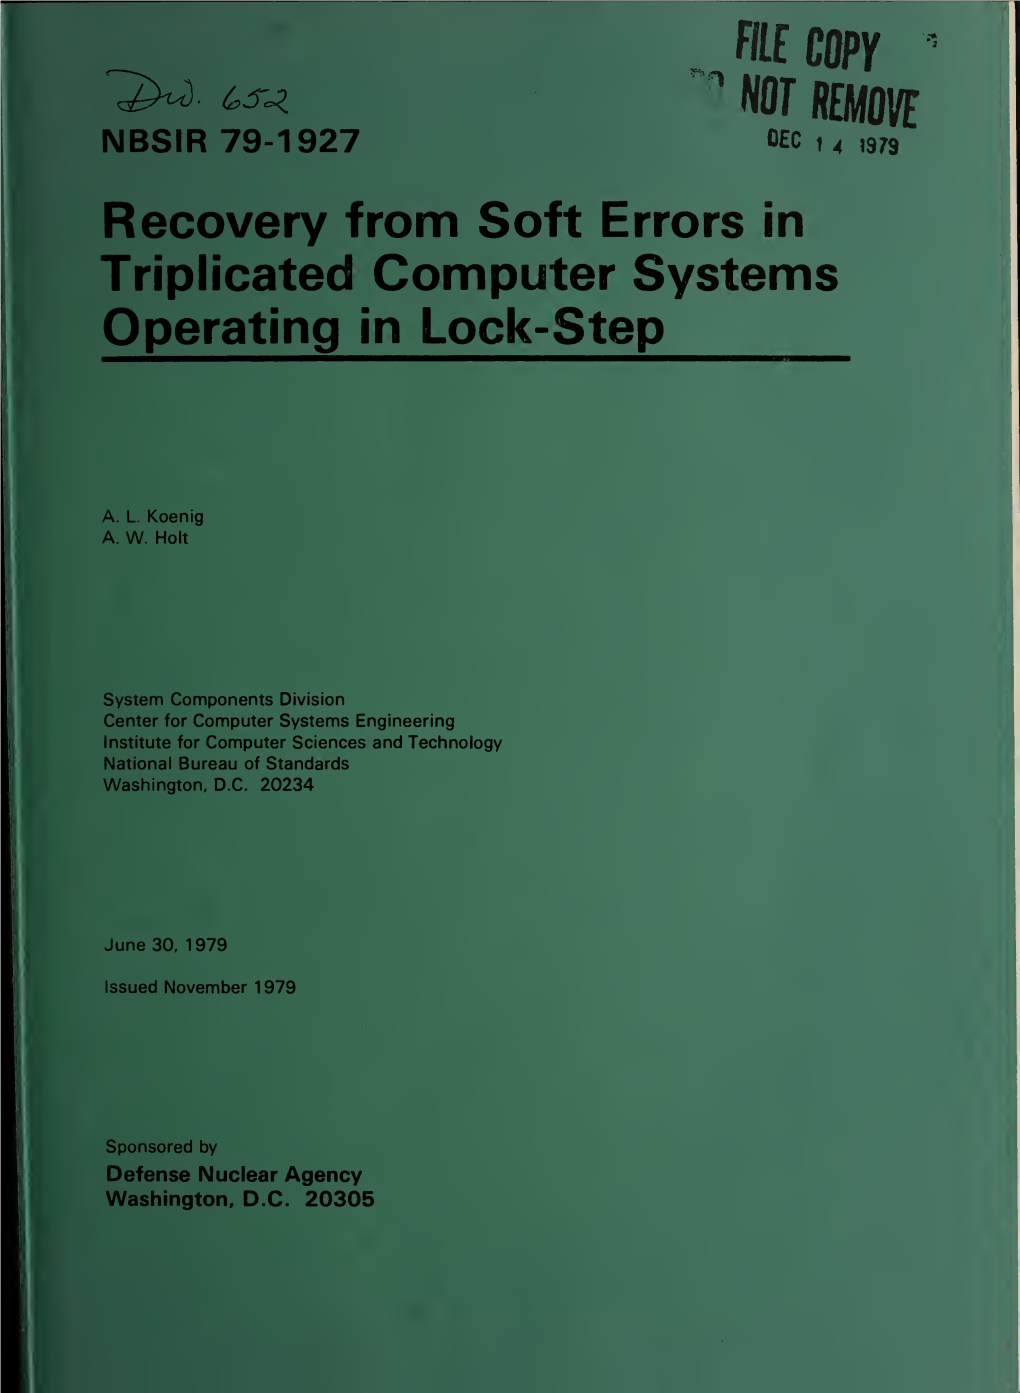 Recovery from Soft Errors in Triplicated Computer Systems Operating in Lock-Step